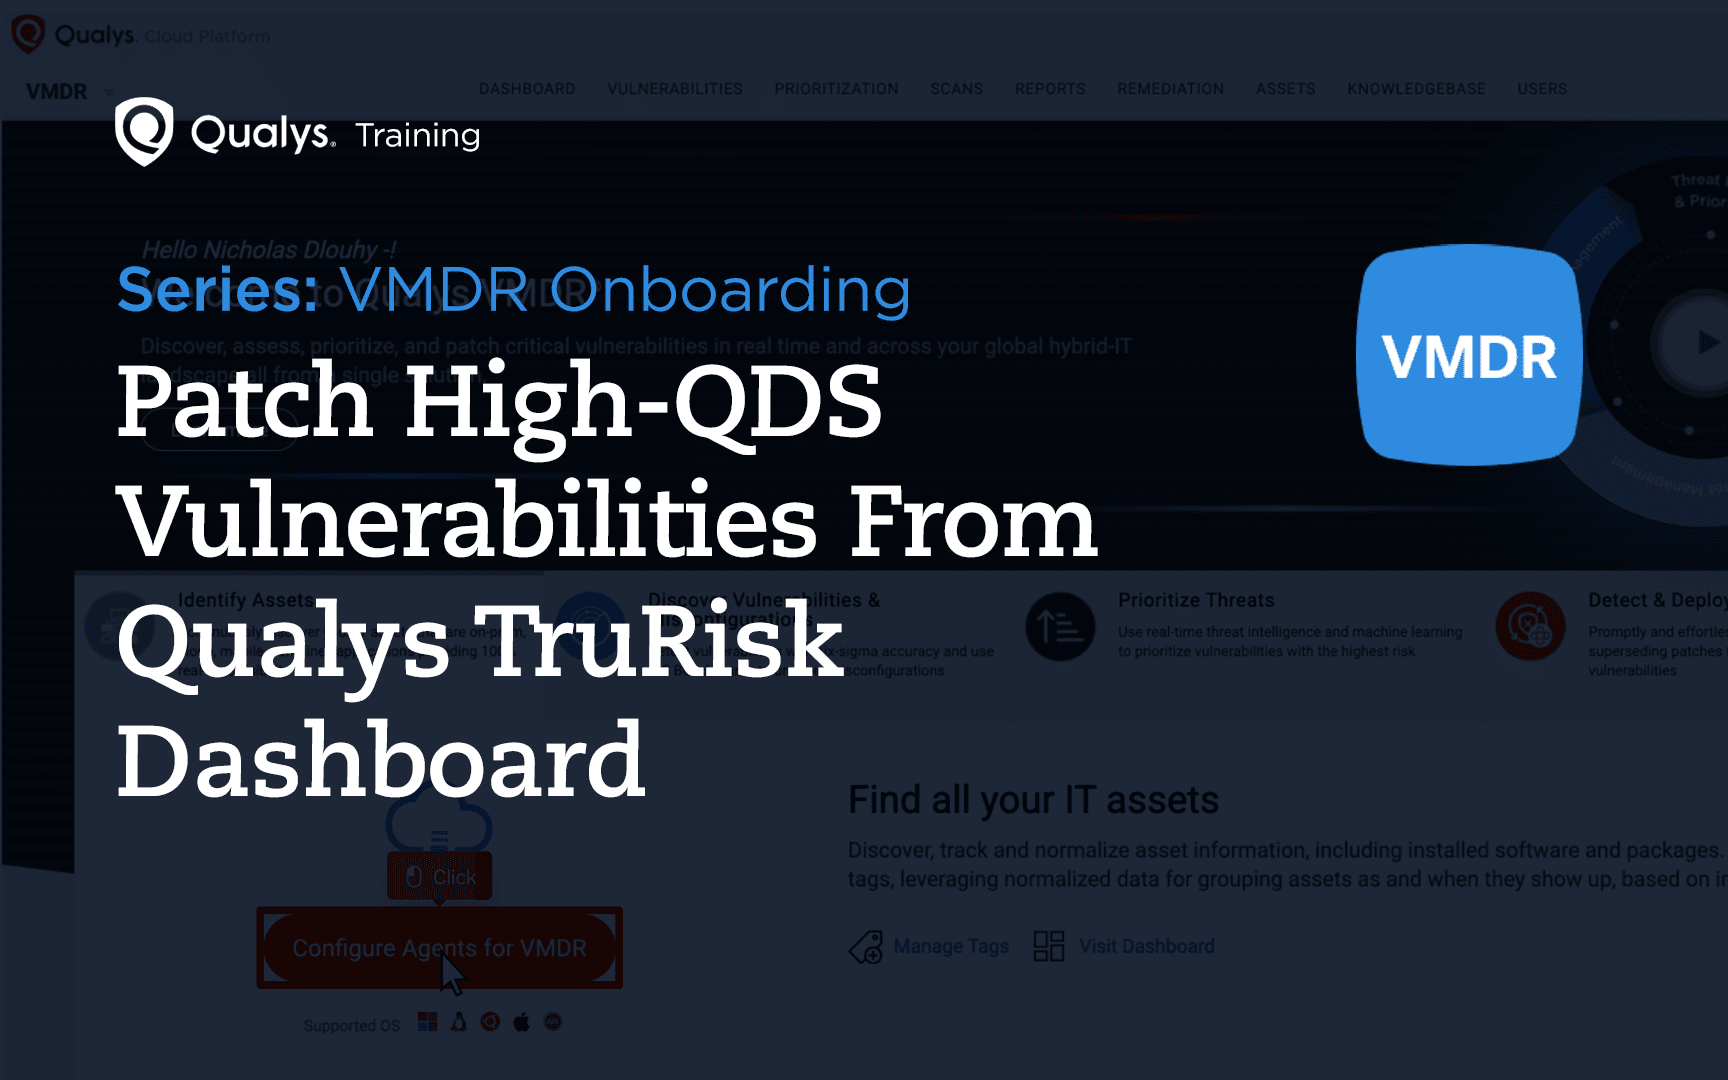 Patch High-QDS vulnerabilities From Qualys TruRisk Dashboard